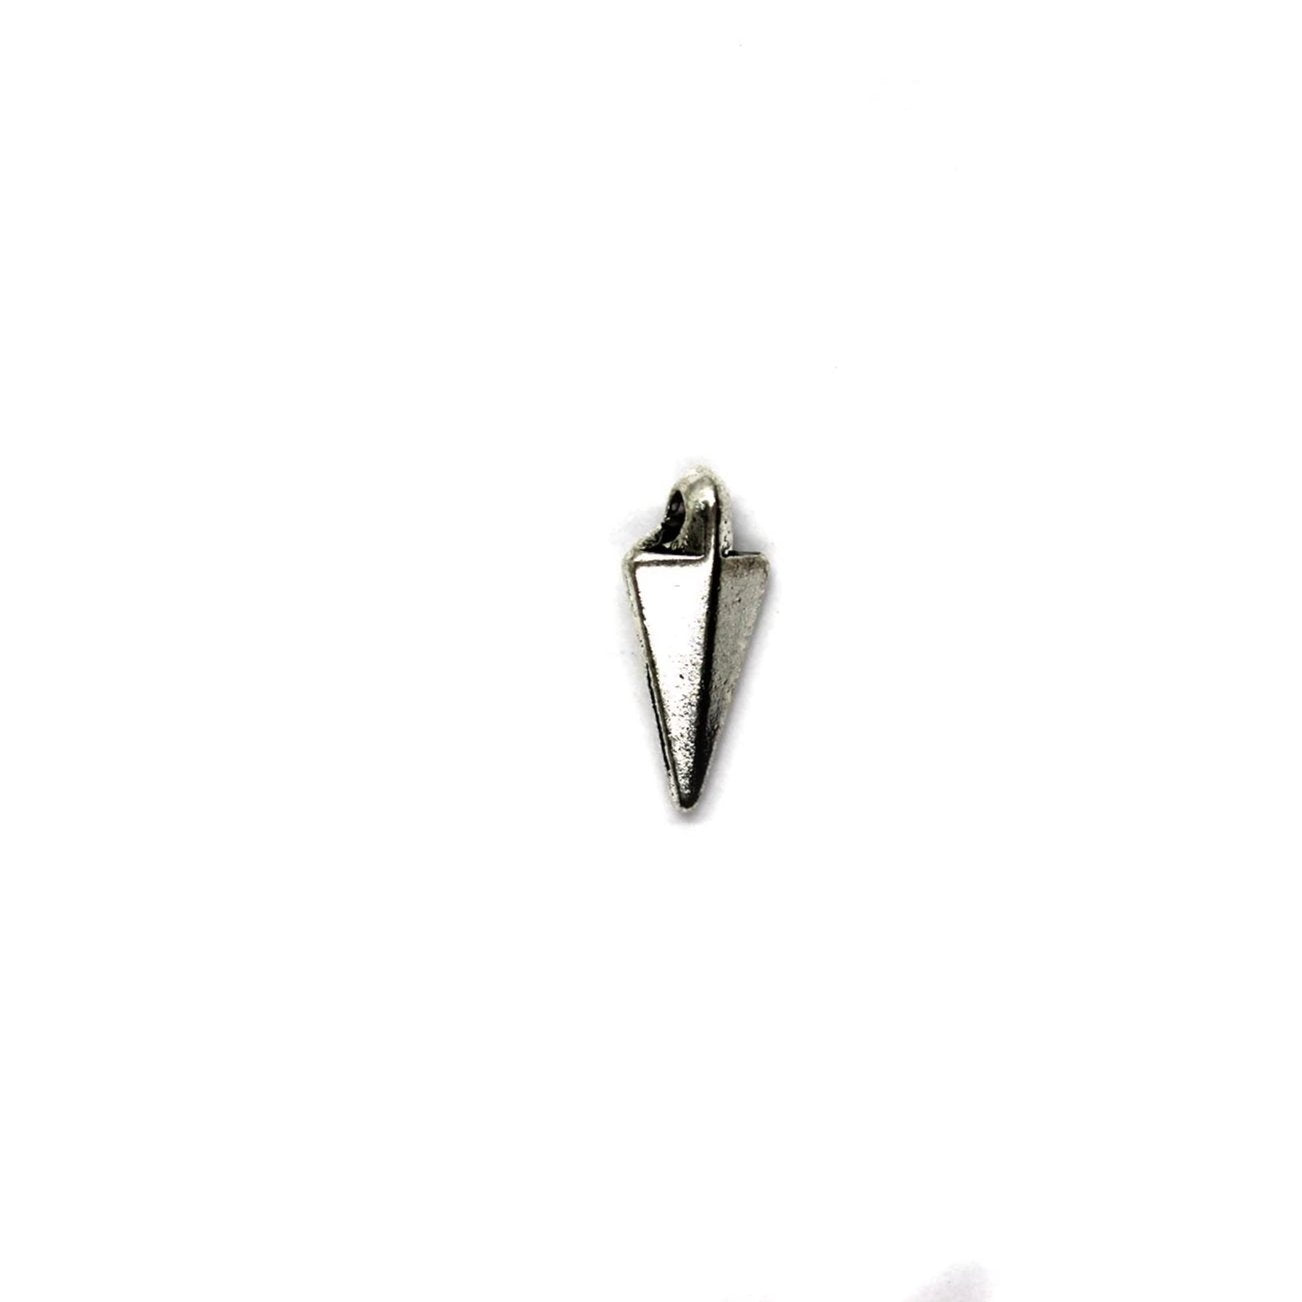 Charm, Solid Triangle, Alloy, Silver, 16mm X 7mm, Sold Per pkg of 6